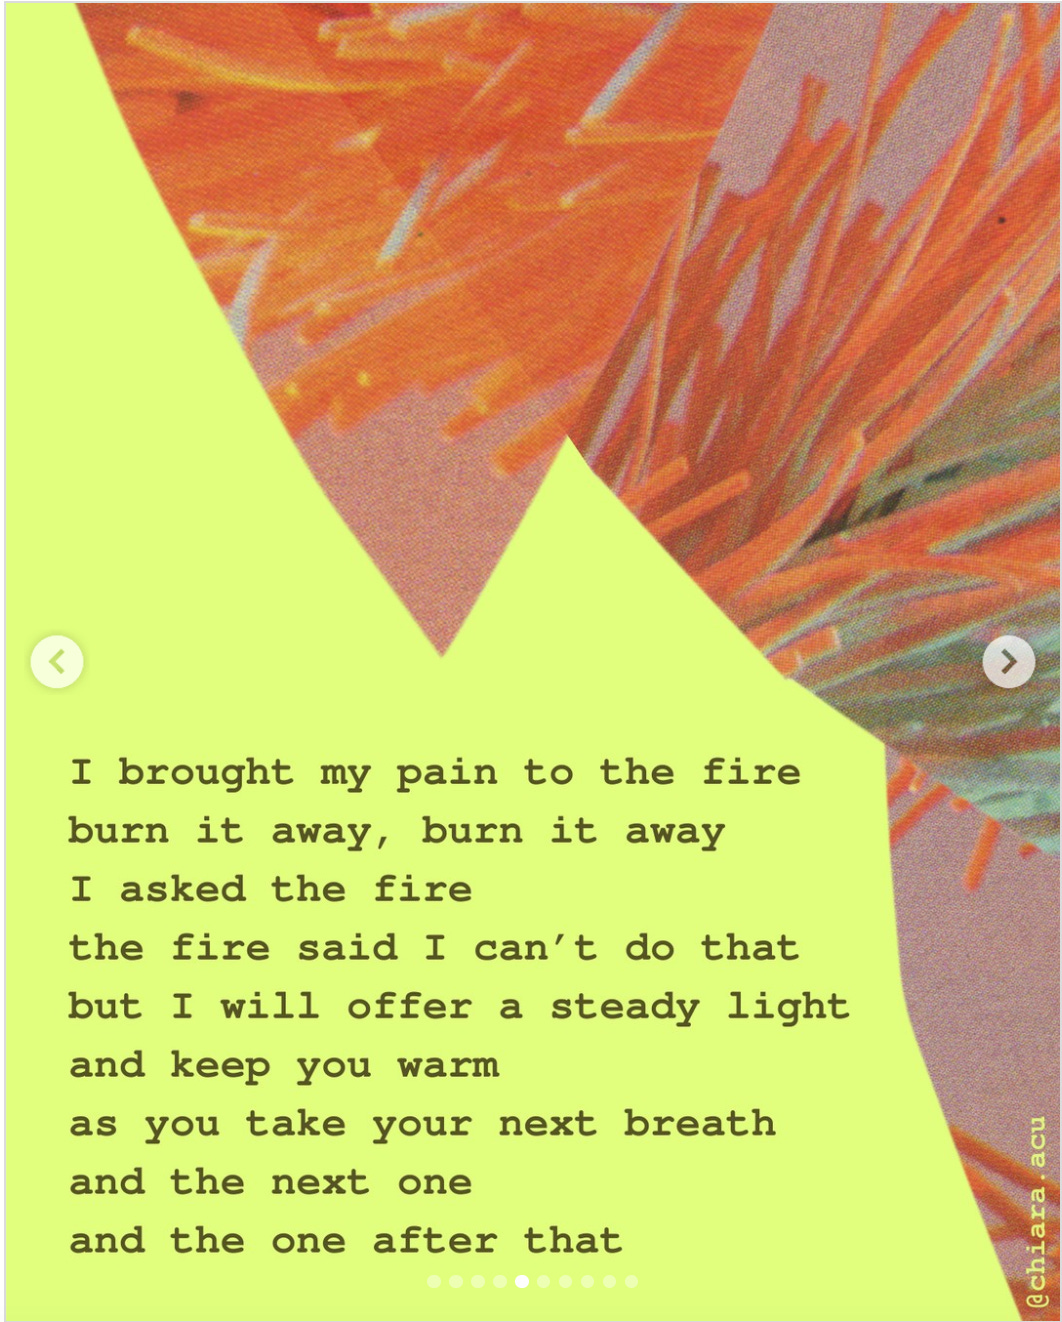 Collage of paper cutouts of vibrant red plants, printed cloth on a pale neon yellow background and brown text. The text reads, "I brought my pain to the fire burn it away, burn it away I asked the fire. the fire said I don't do that but i will offer a steady light and keep you warm as you take your next breath and the next one and the one after that"